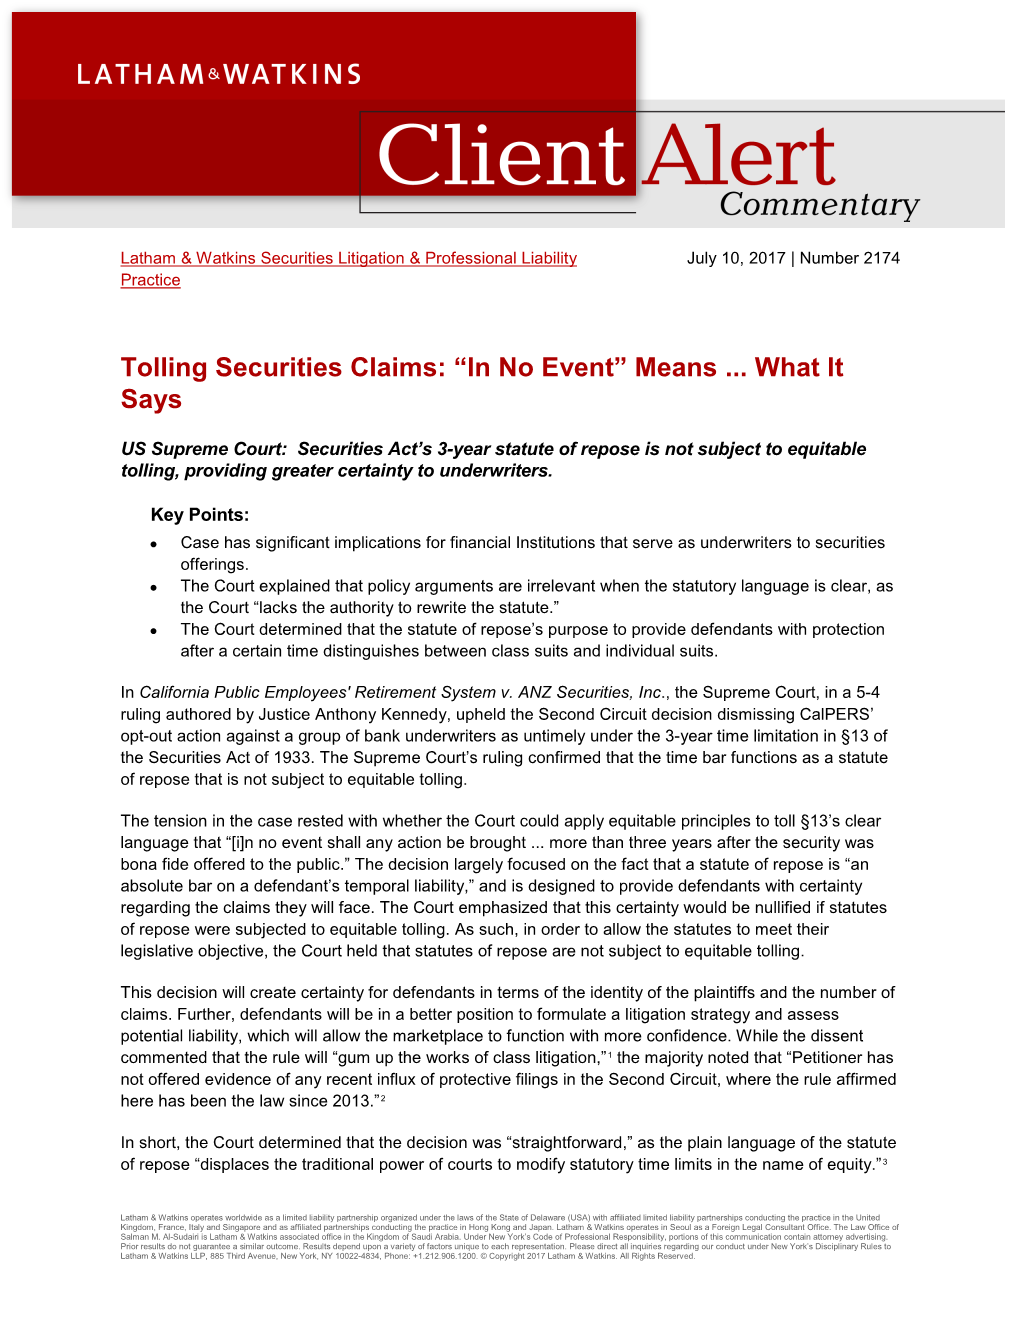 Tolling Securities Claims: “In No Event” Means